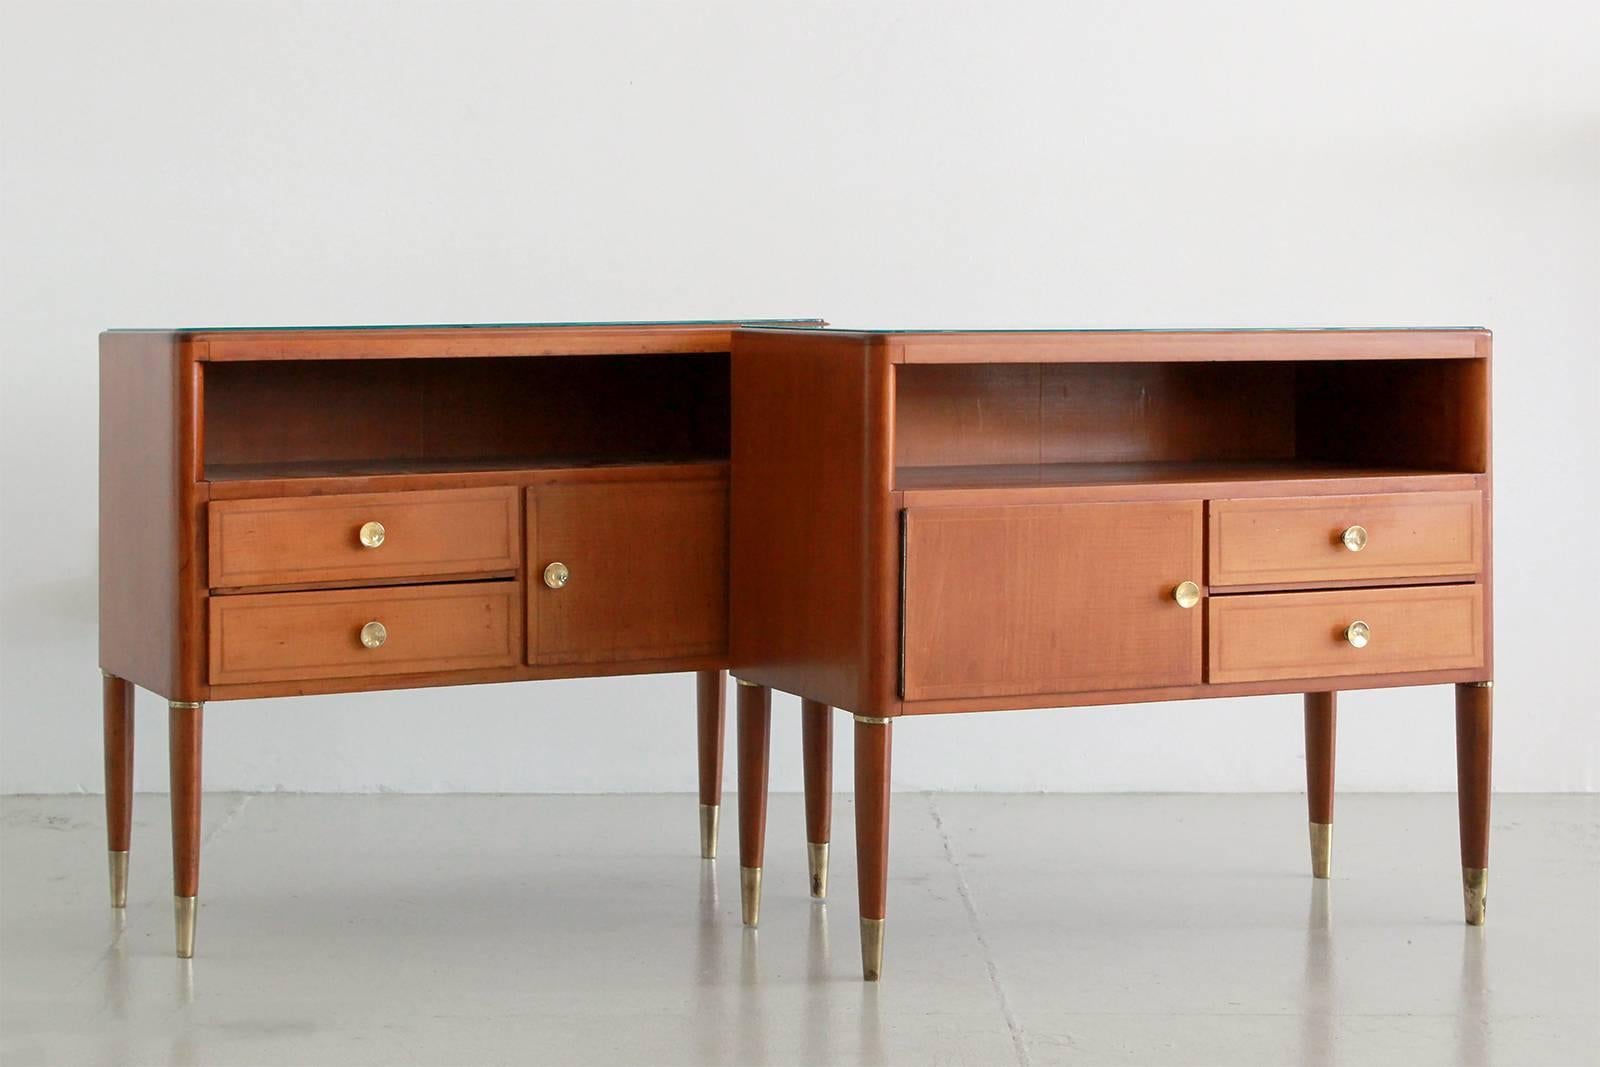 Pair of Italian nightstands by Paolo Buffa. Beautiful mahogany wood with open storage and drawers. Original glass with brass hardware and tapered brass feet.